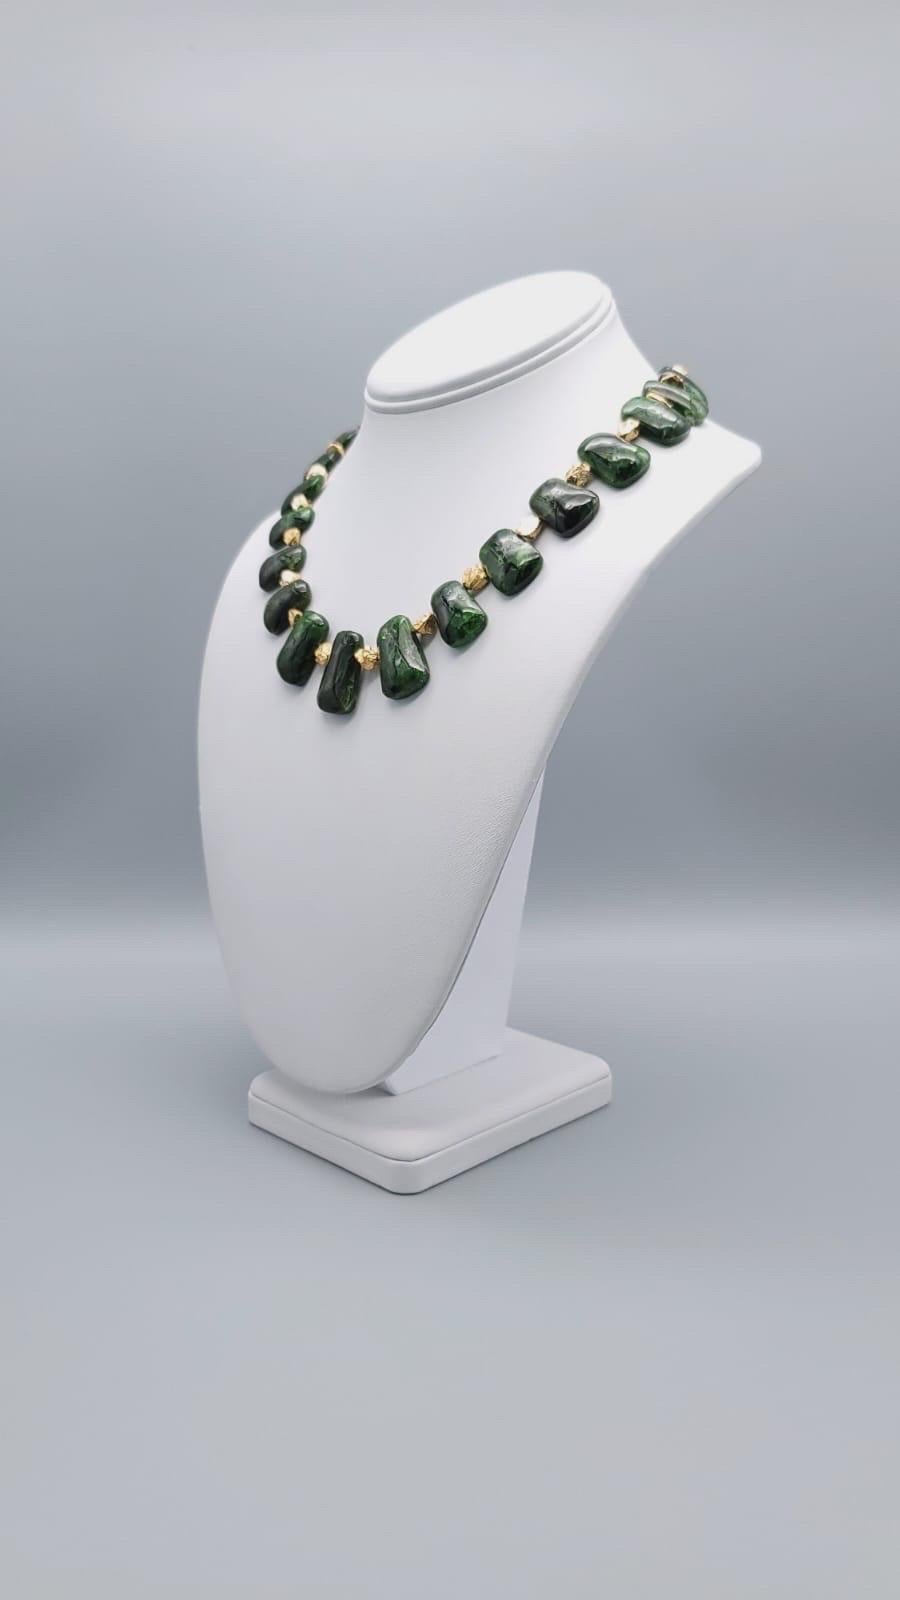 A.Jeschel Richly colored Chrome Diopside necklace 2